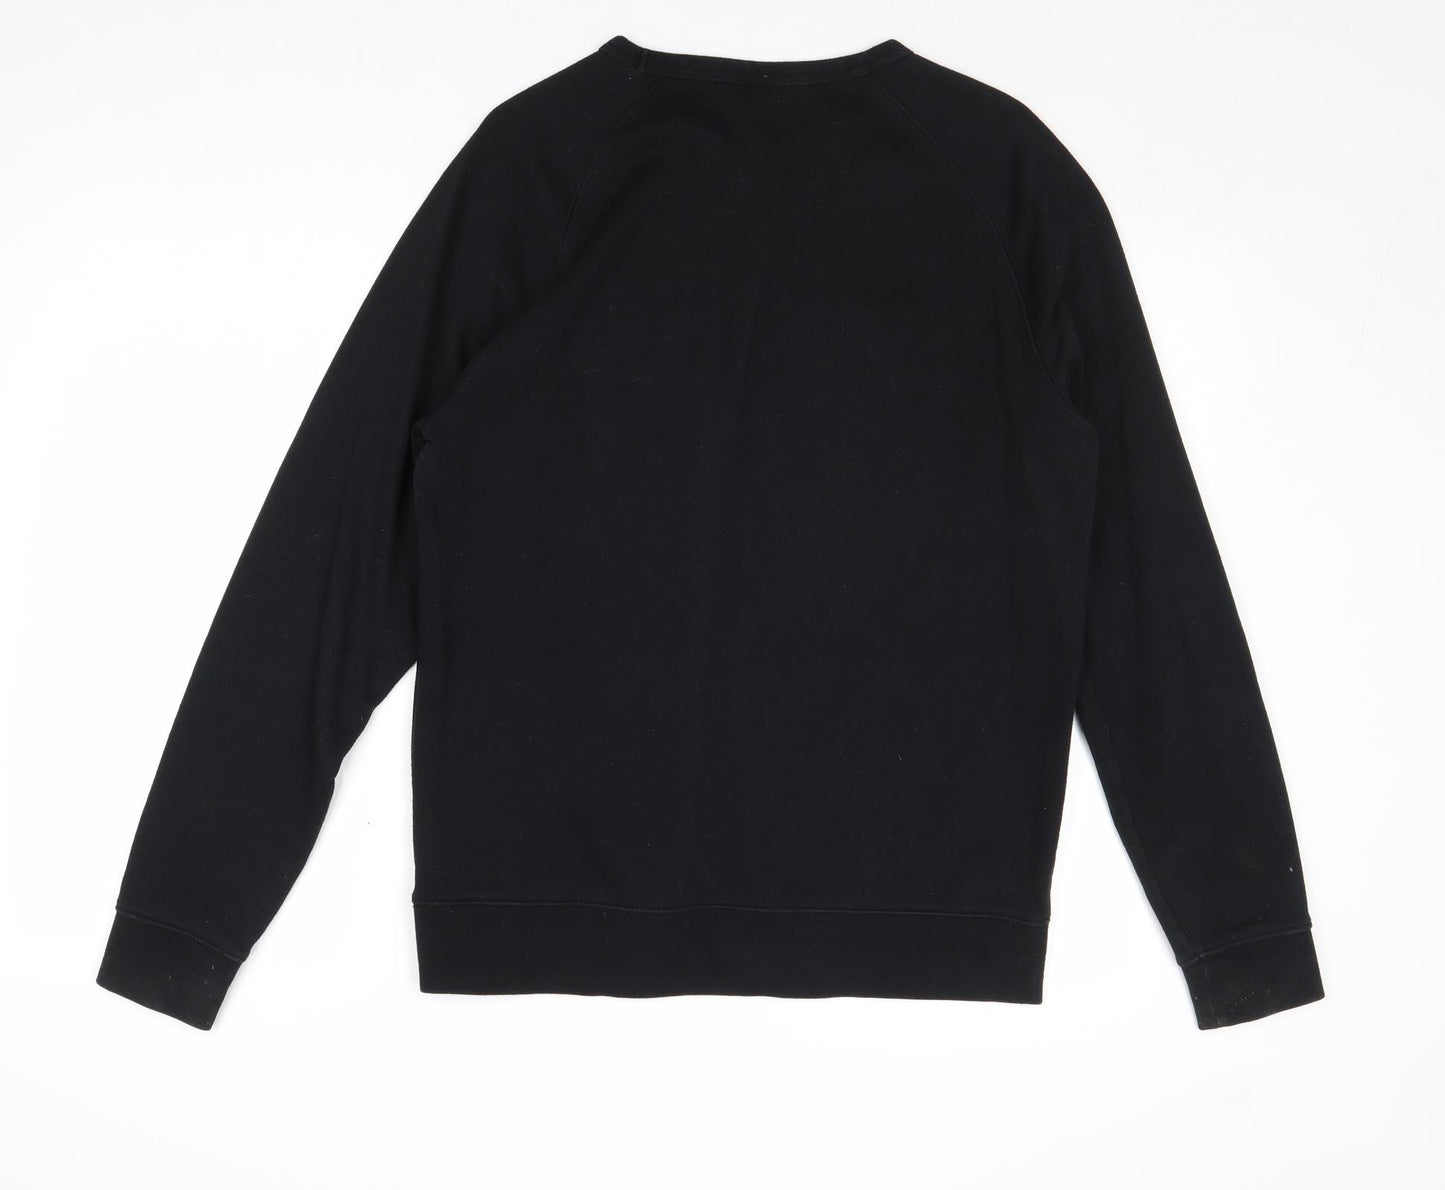 H&M Mens Black Polyester Pullover Sweatshirt Size M - The Best Present Ever